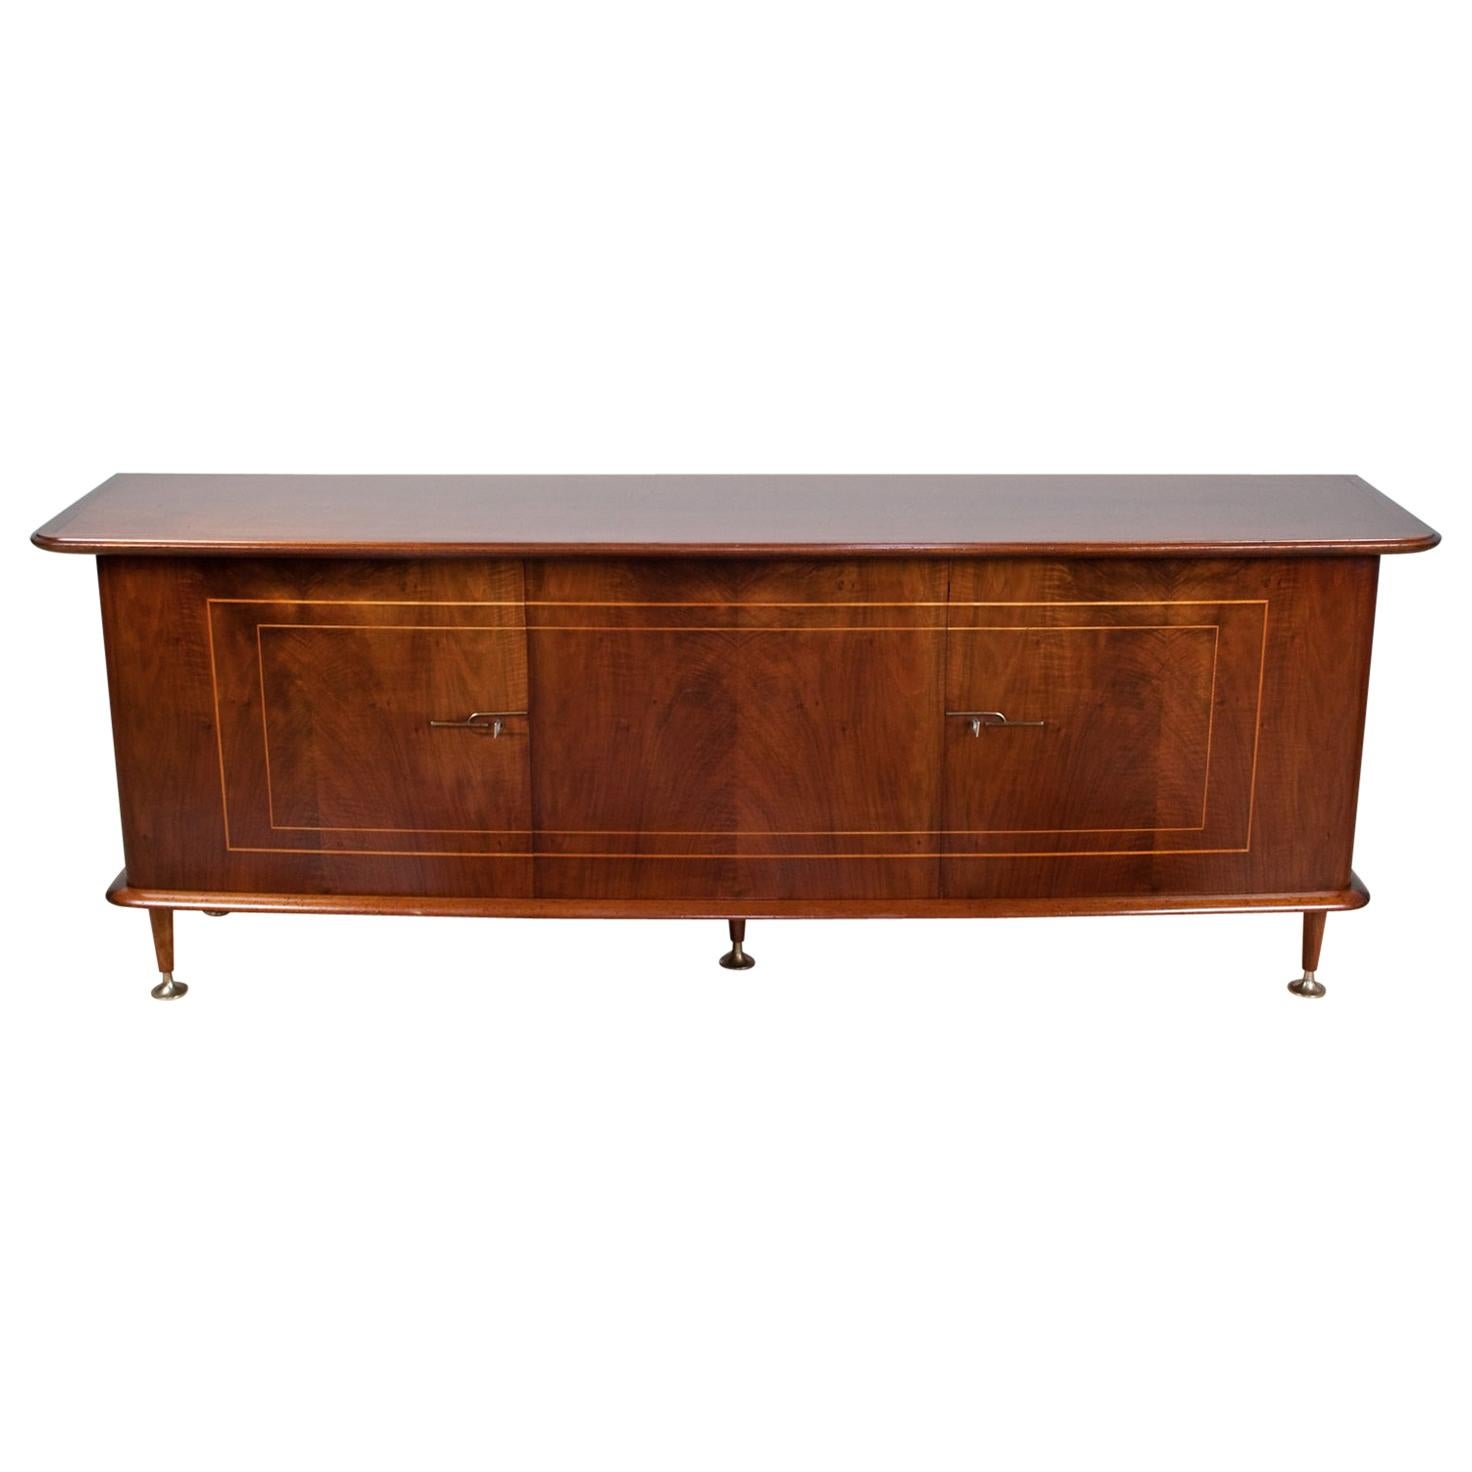 Large Art Deco Sideboard in Mahogany, Walnut and Brass by Abraham Patijn, 1950s